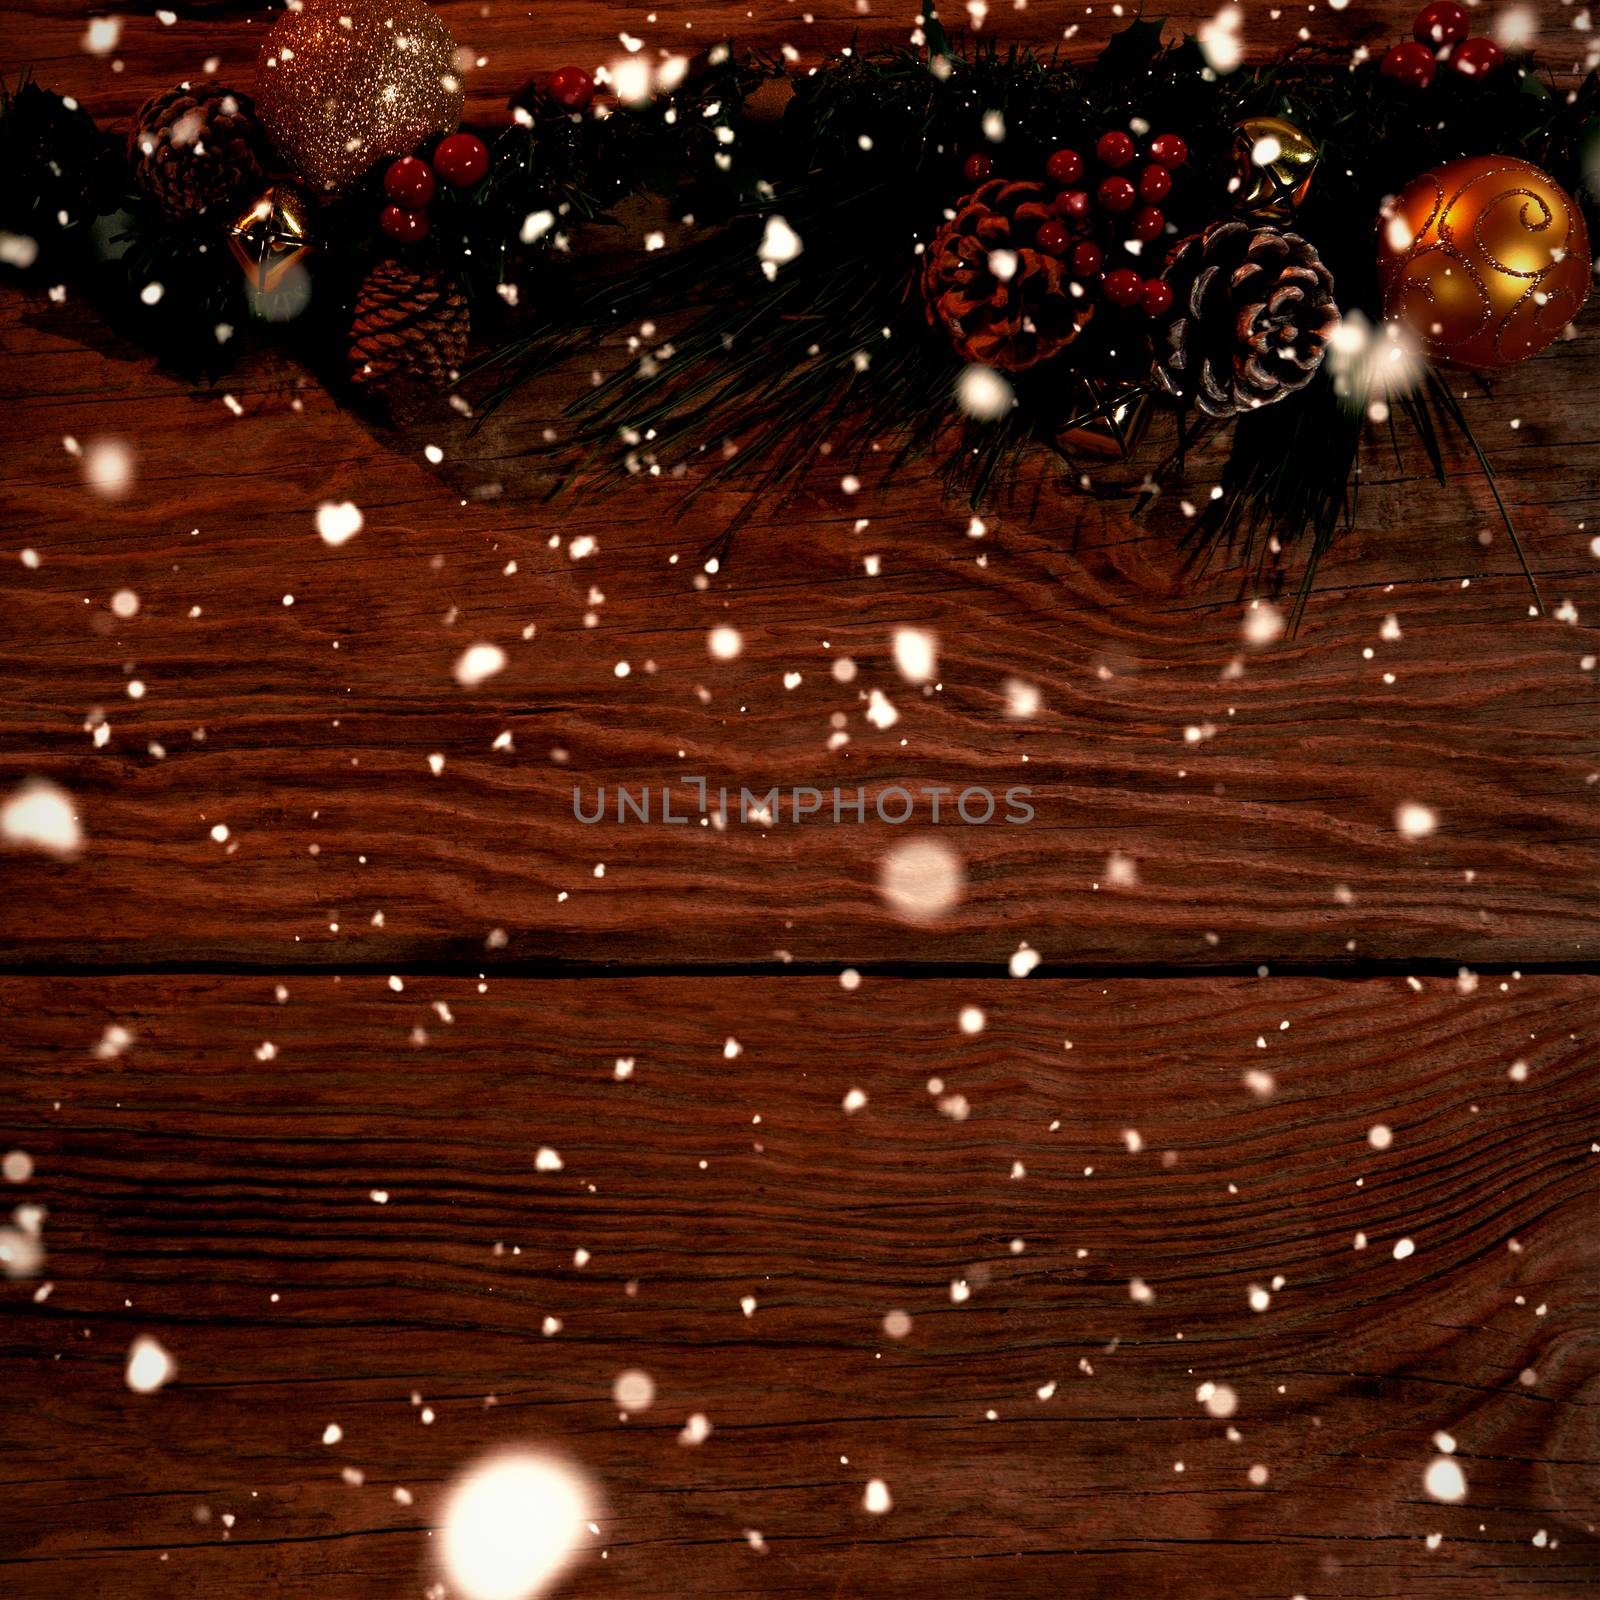 Snow falling against copy space with rustic christmas decorations